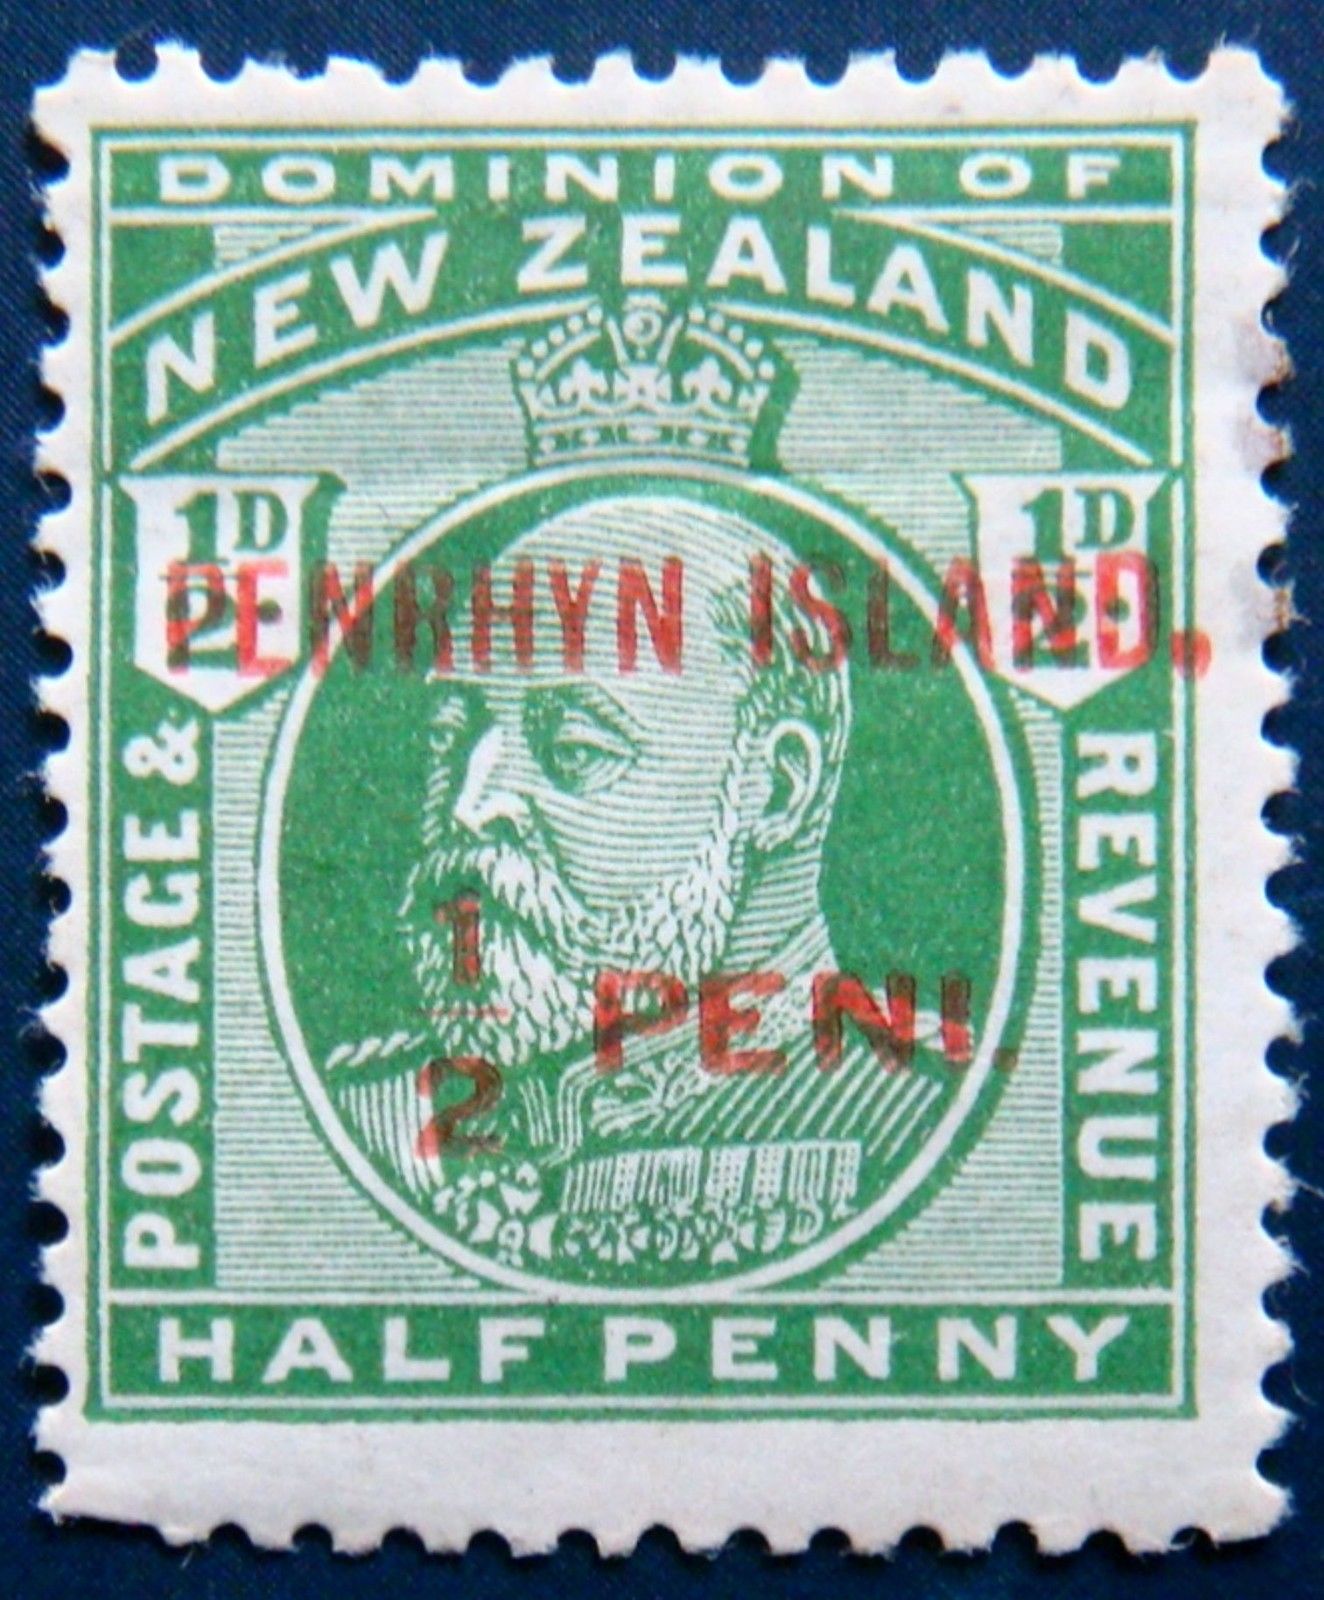 A Selection of Classic Stamps